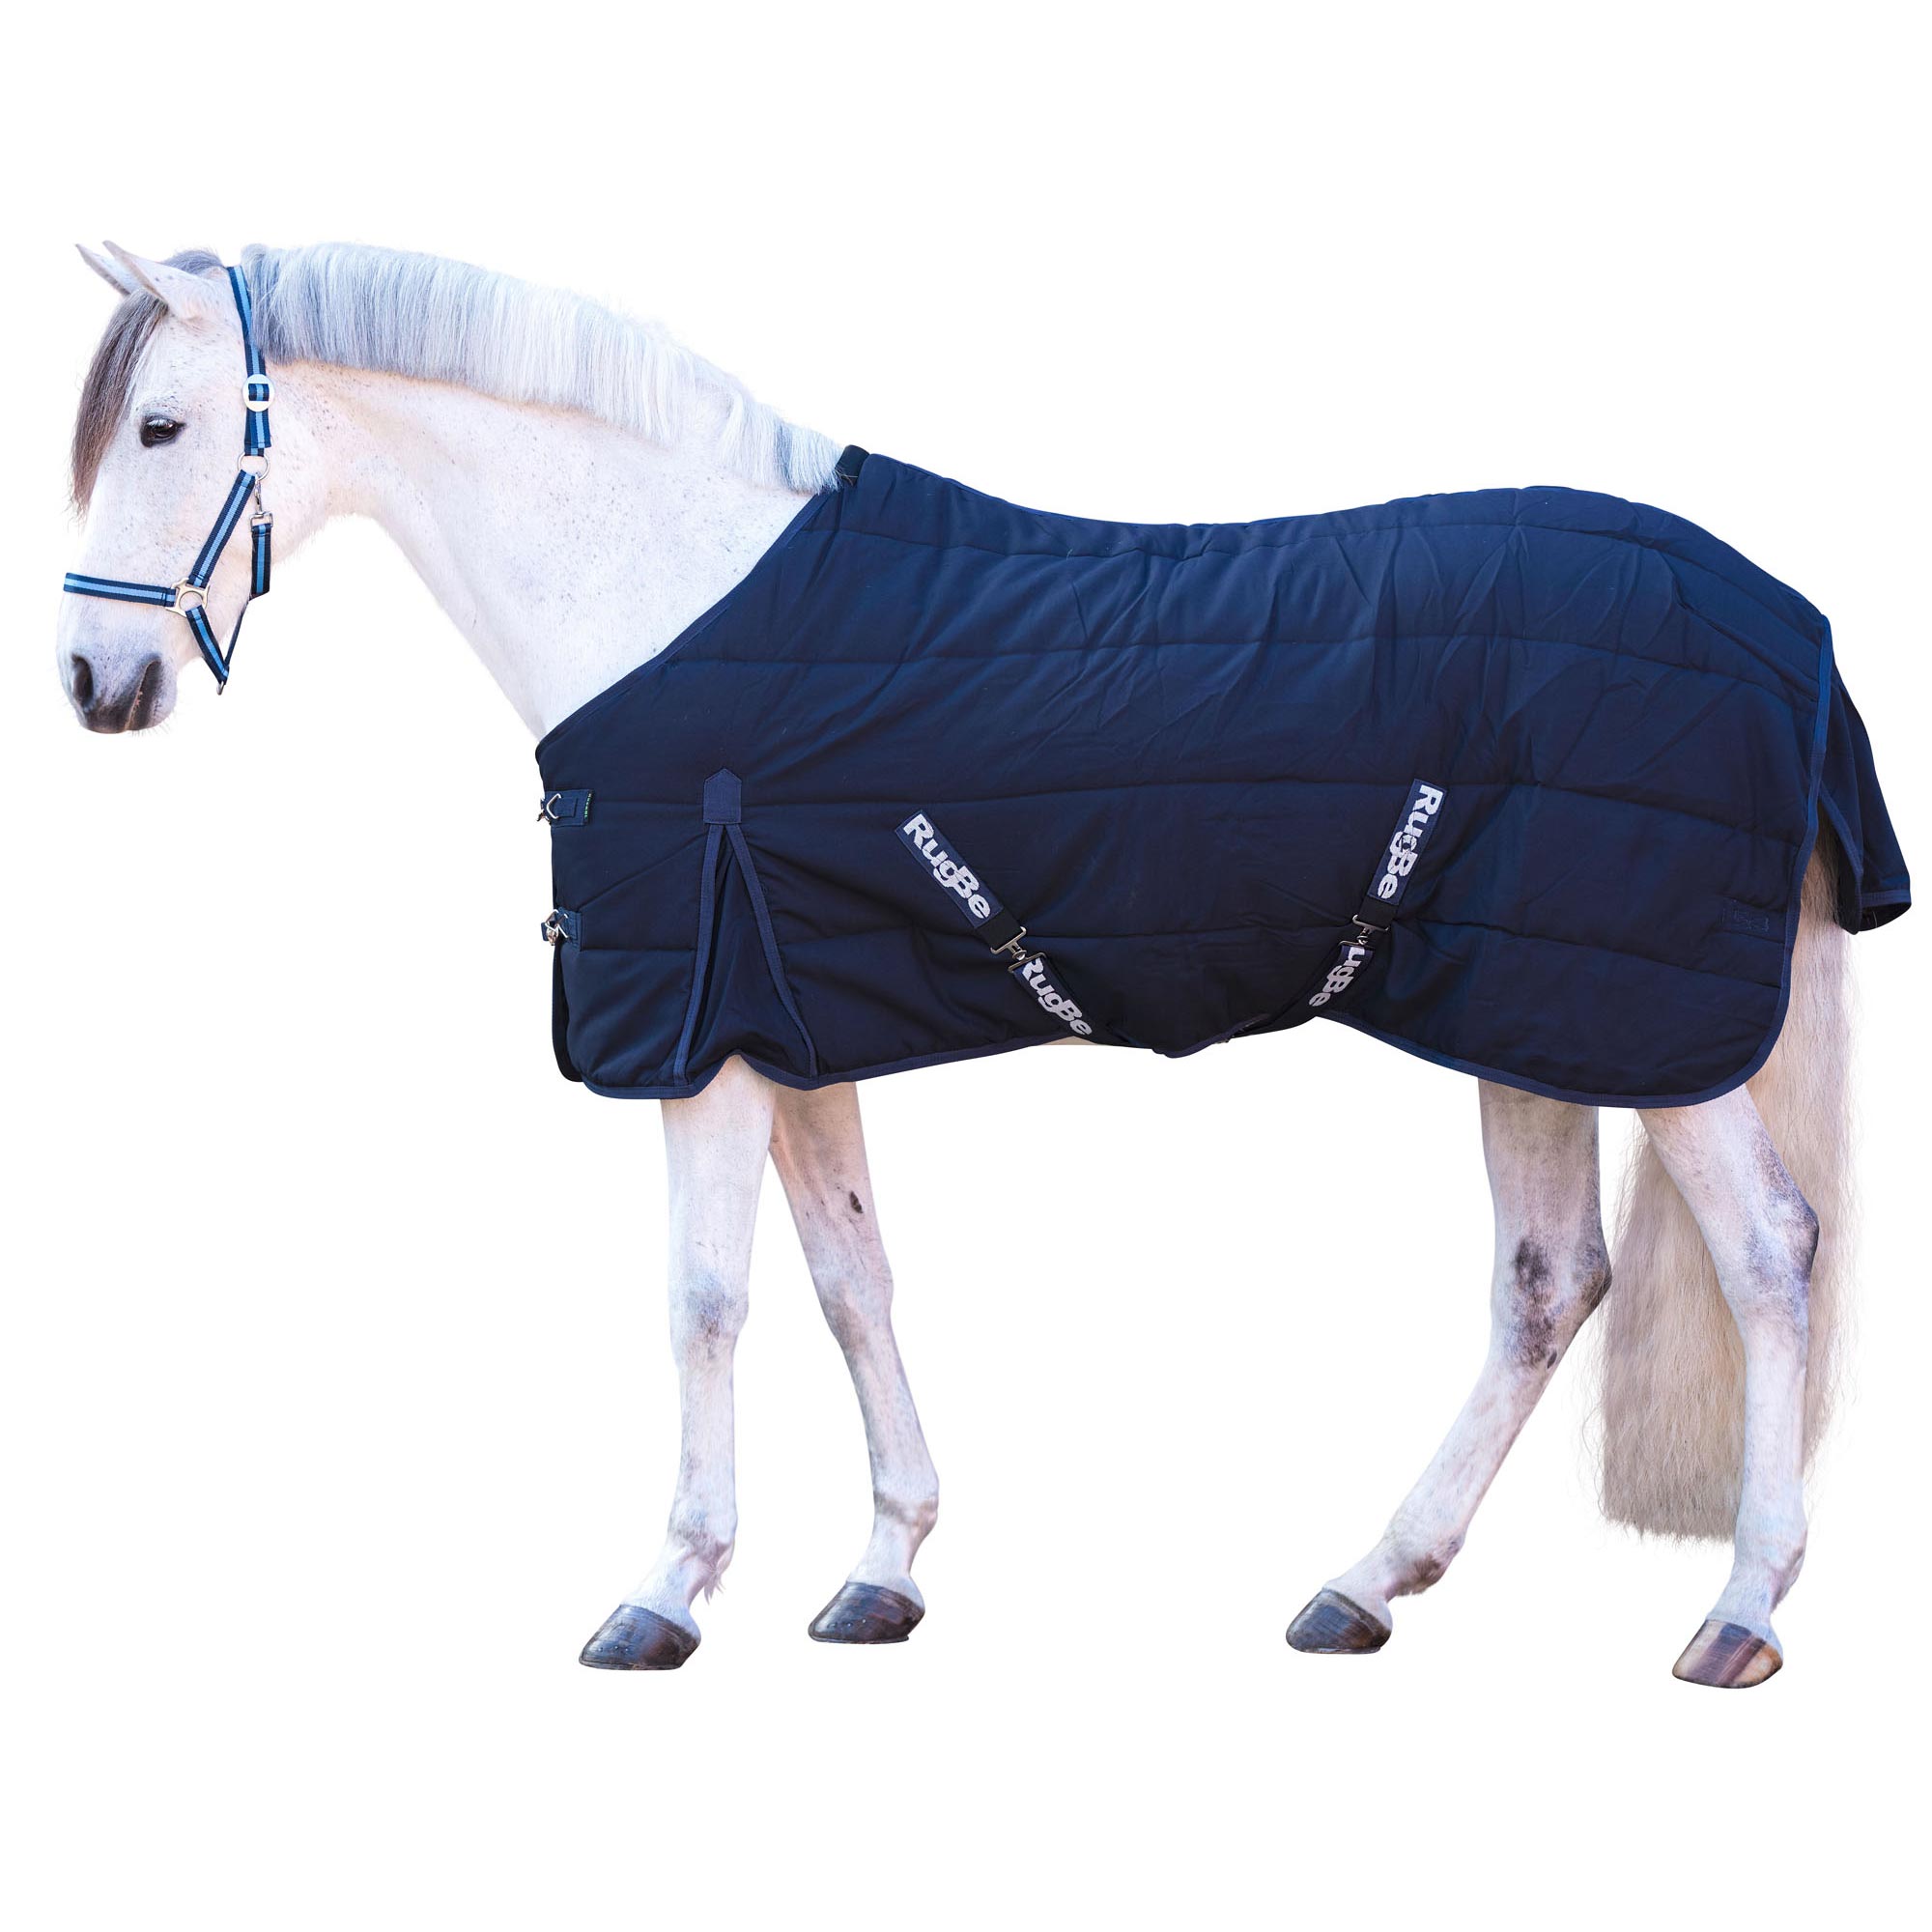 Covalliero RugBe Horse rug Indoor 300D, 150g